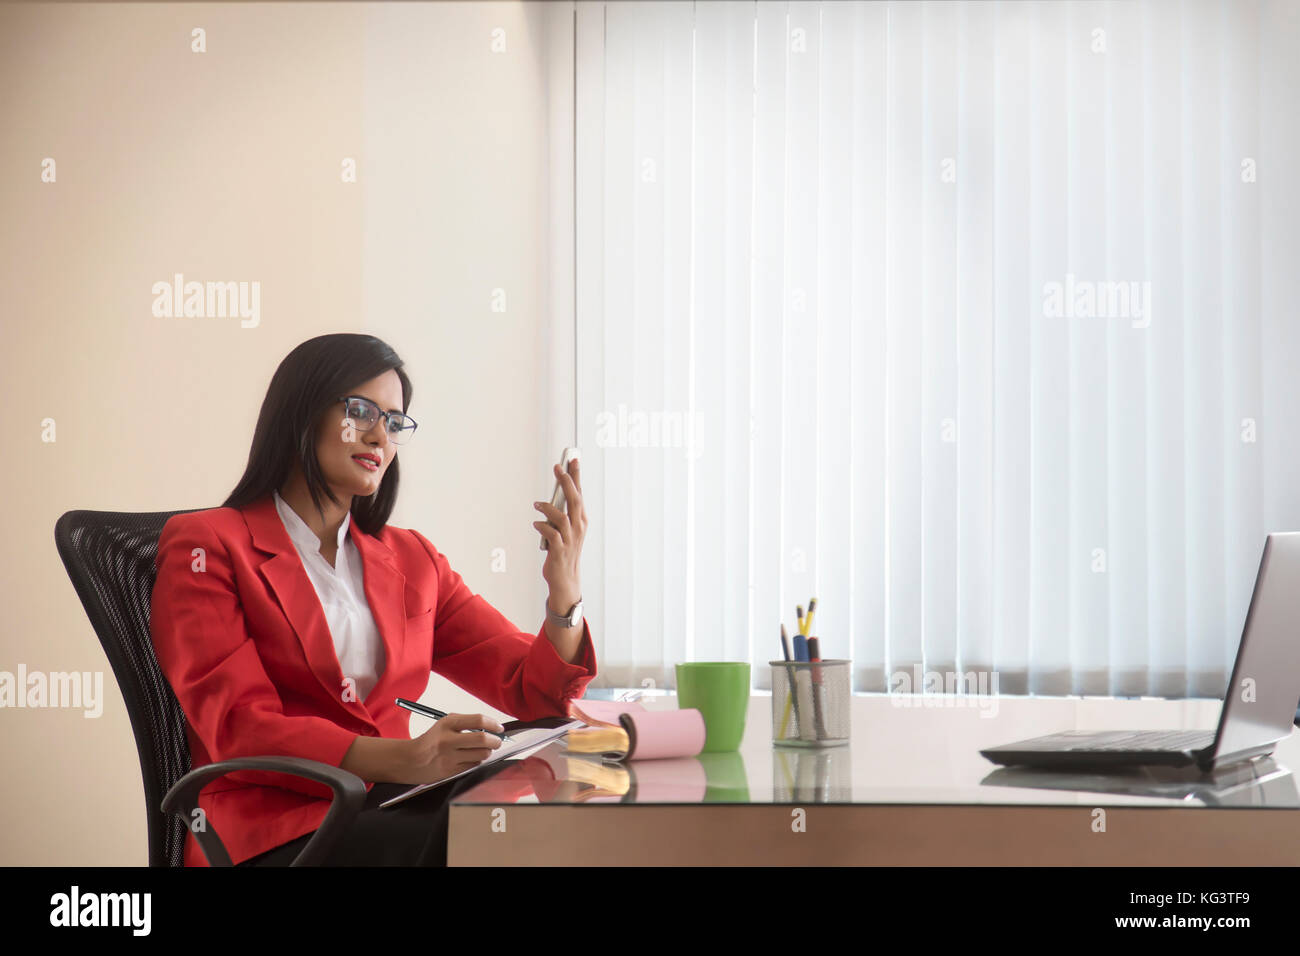 Businesswoman holding cell phone writing in notebook Stock Photo